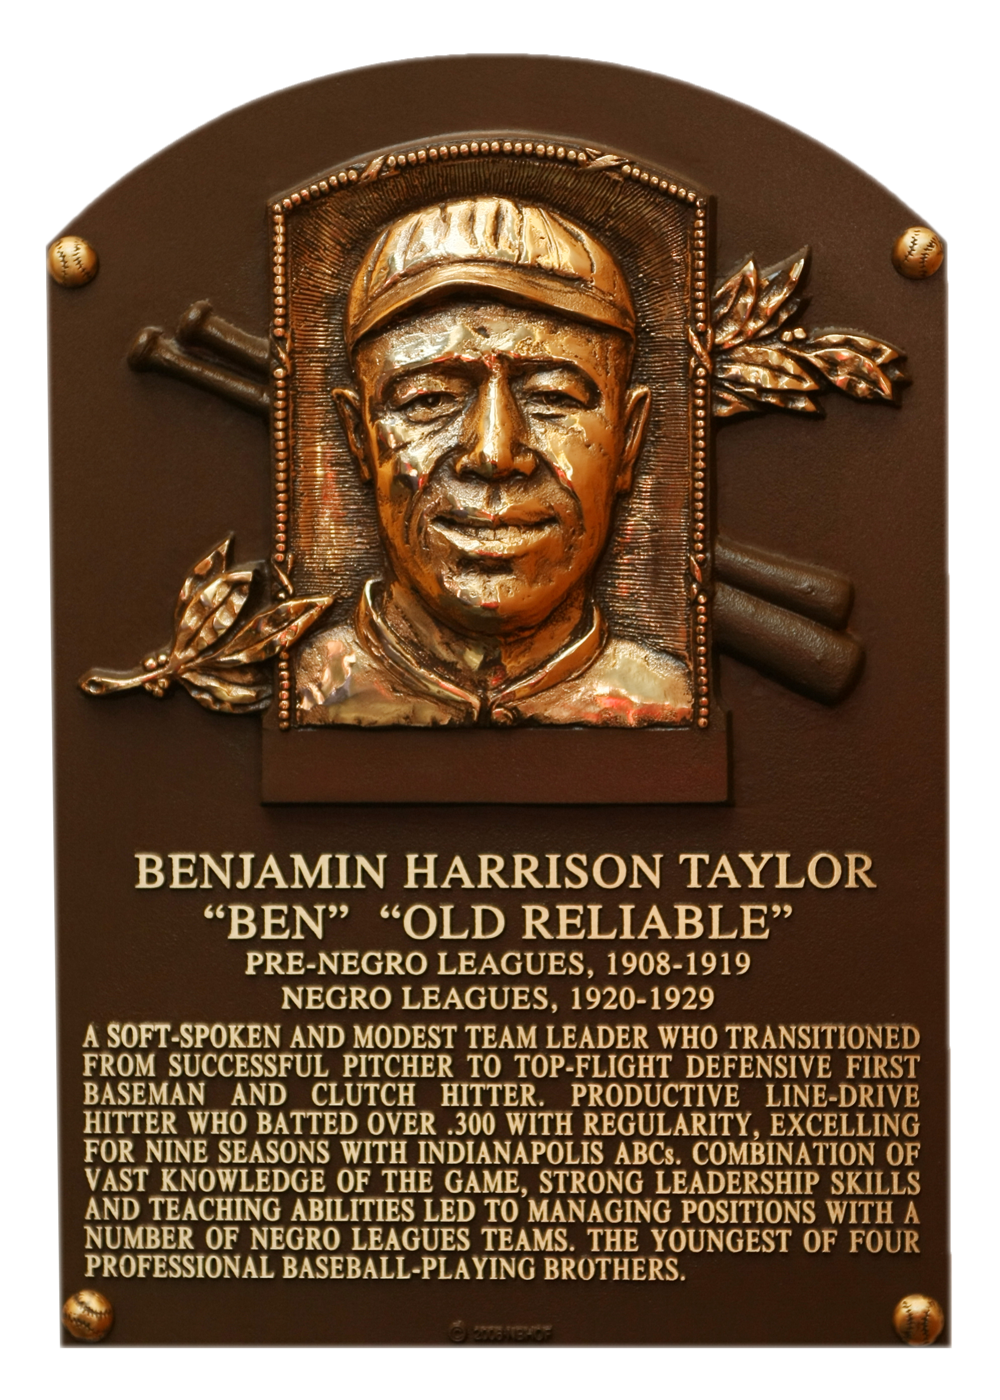 Ben Taylor Hall of Fame plaque